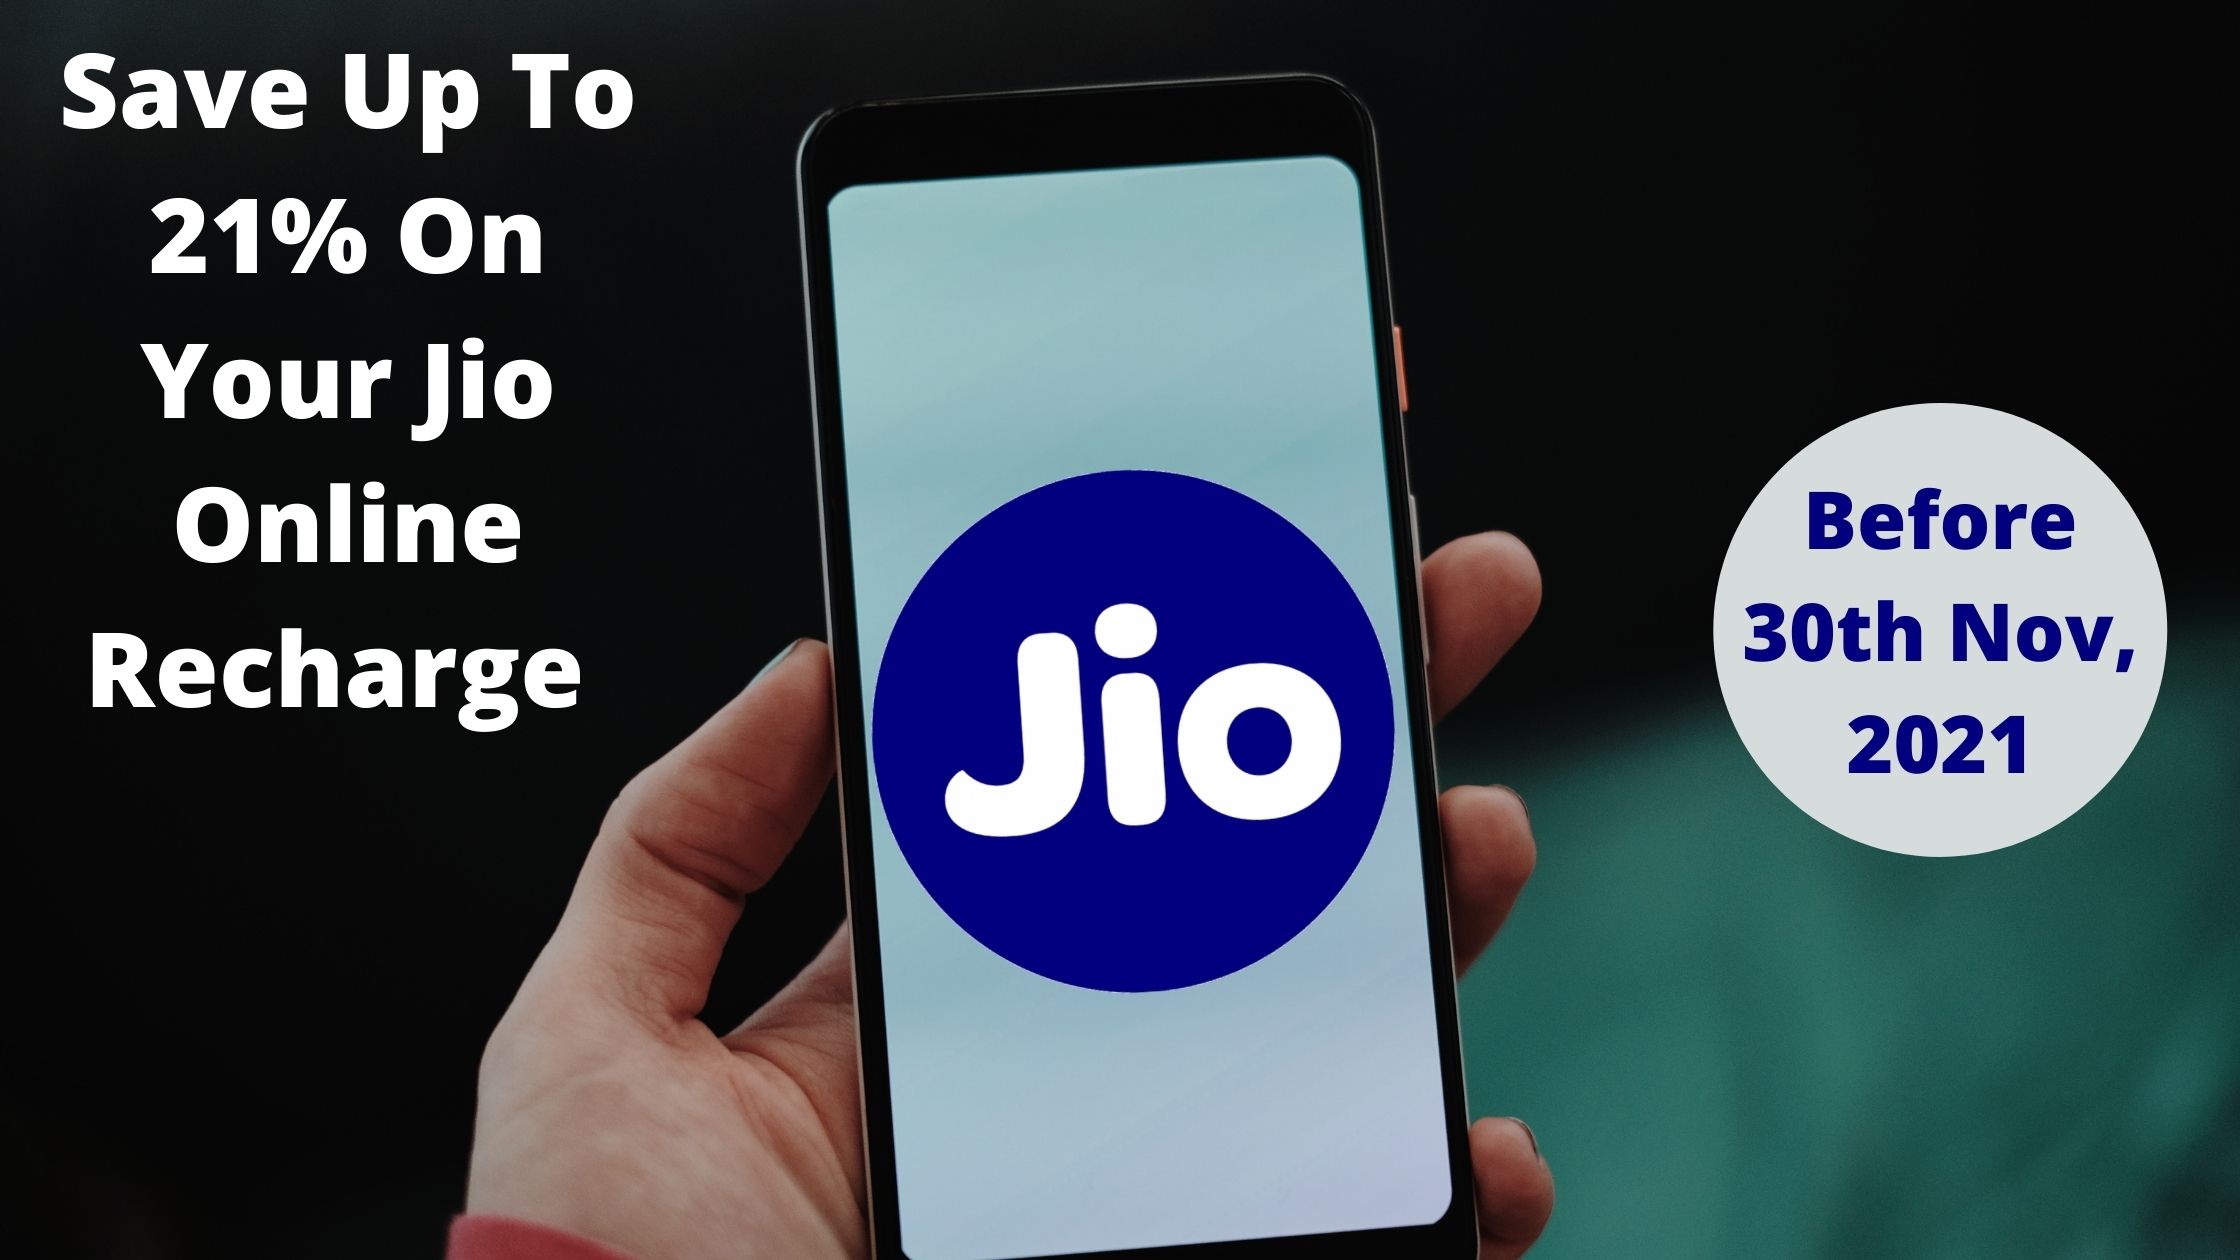  Save Up To 21% On Your Jio Online Recharge Before 1st Dec 2021